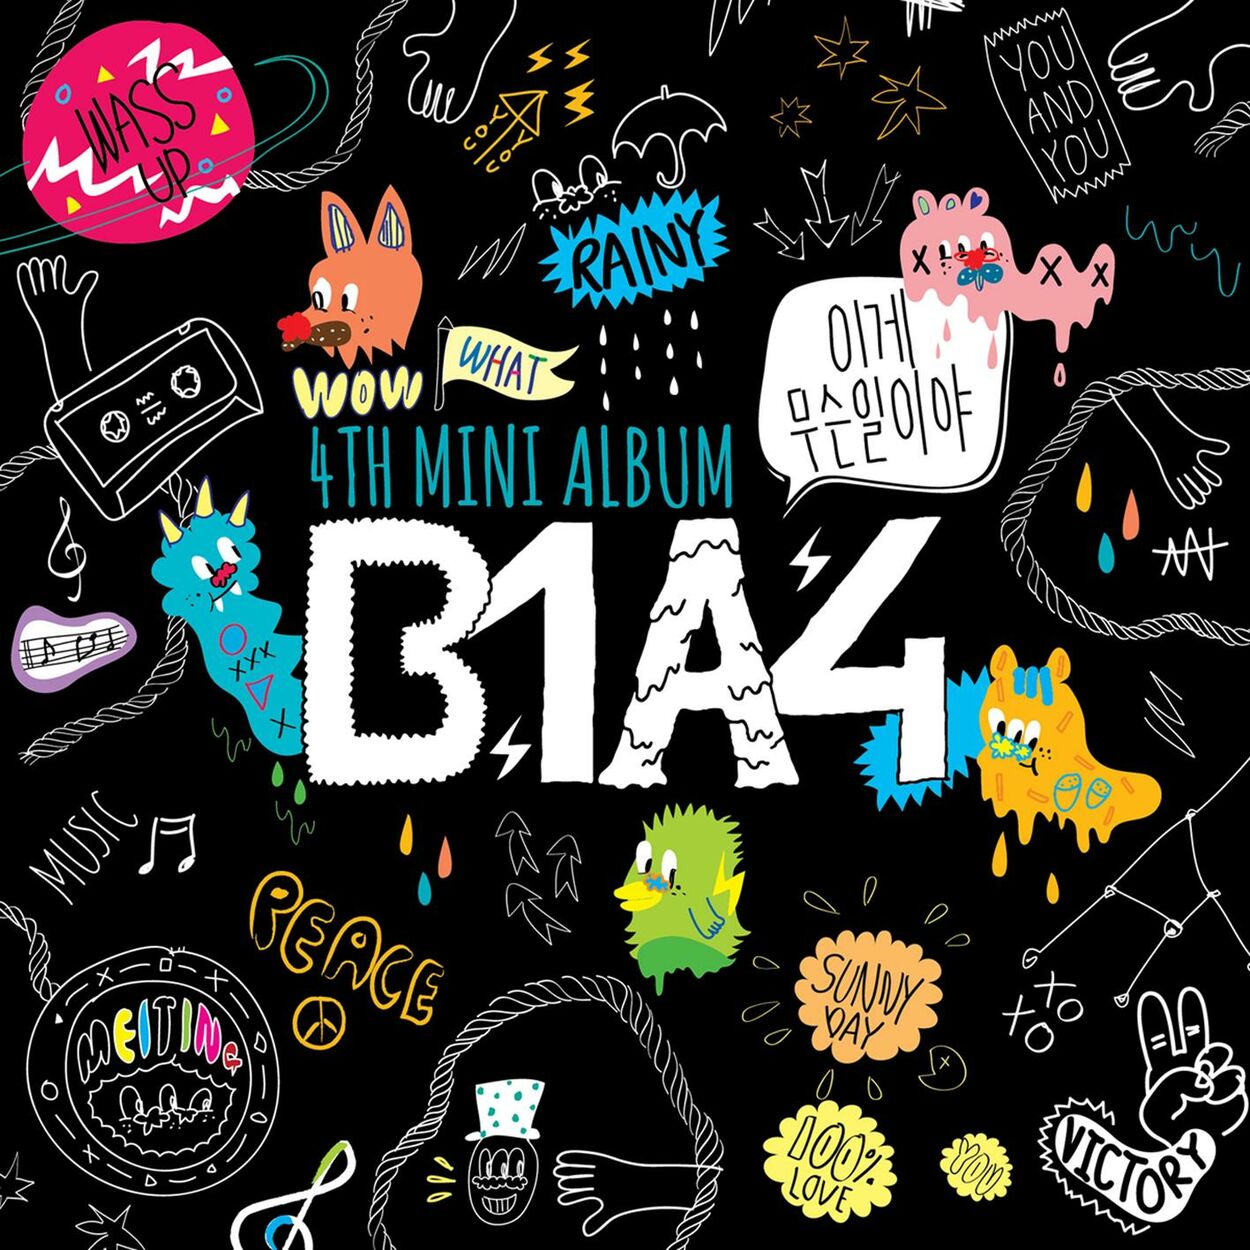 B1A4 – What’s Happening?